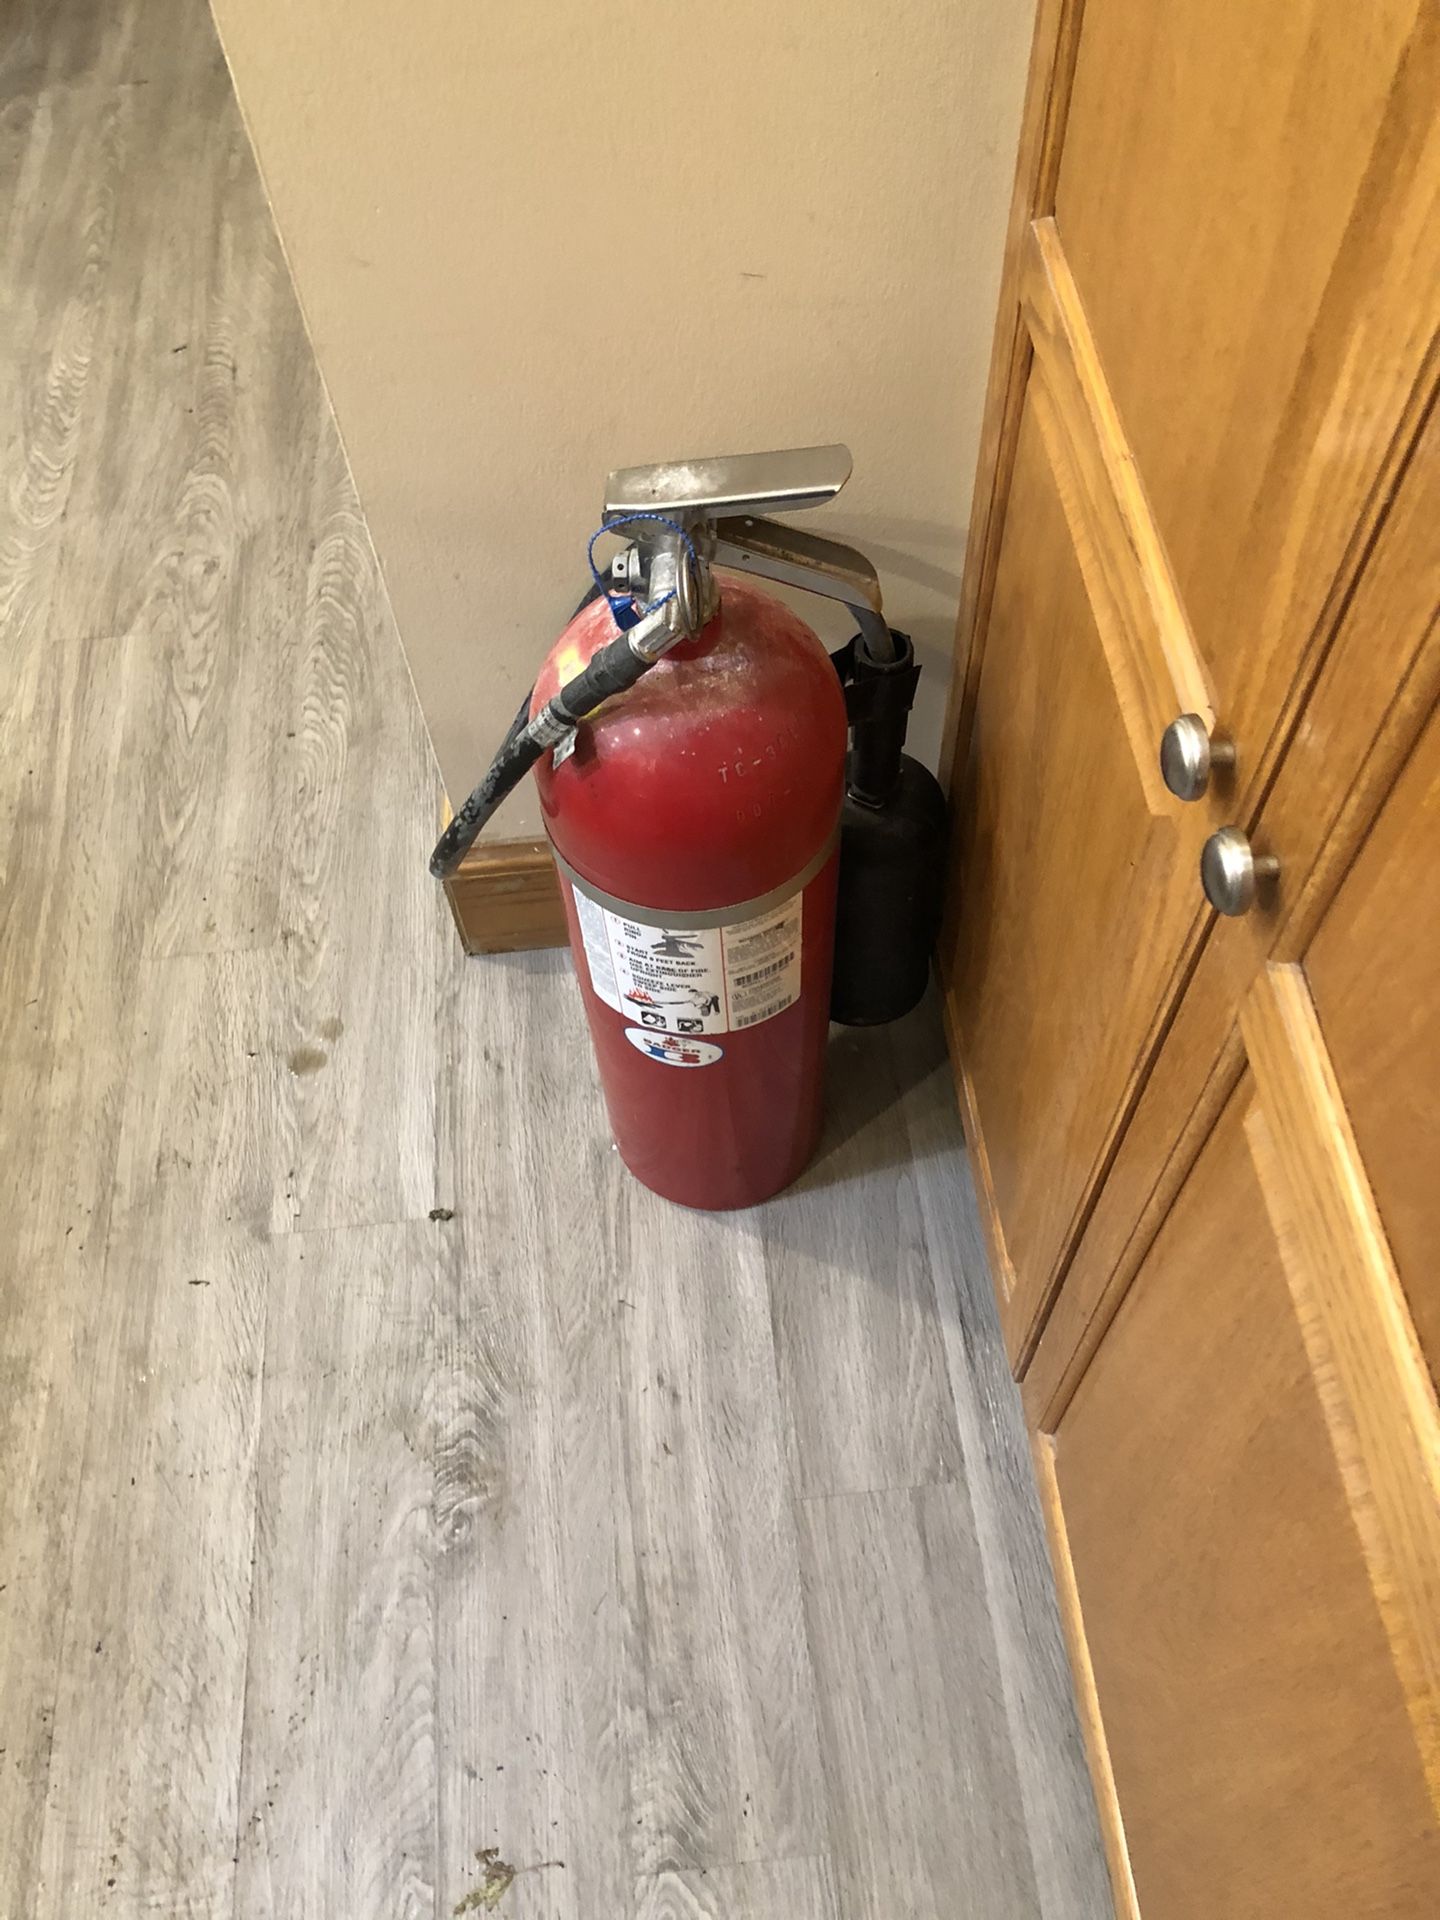 Large fire extinguisher very heavy - charged but expired